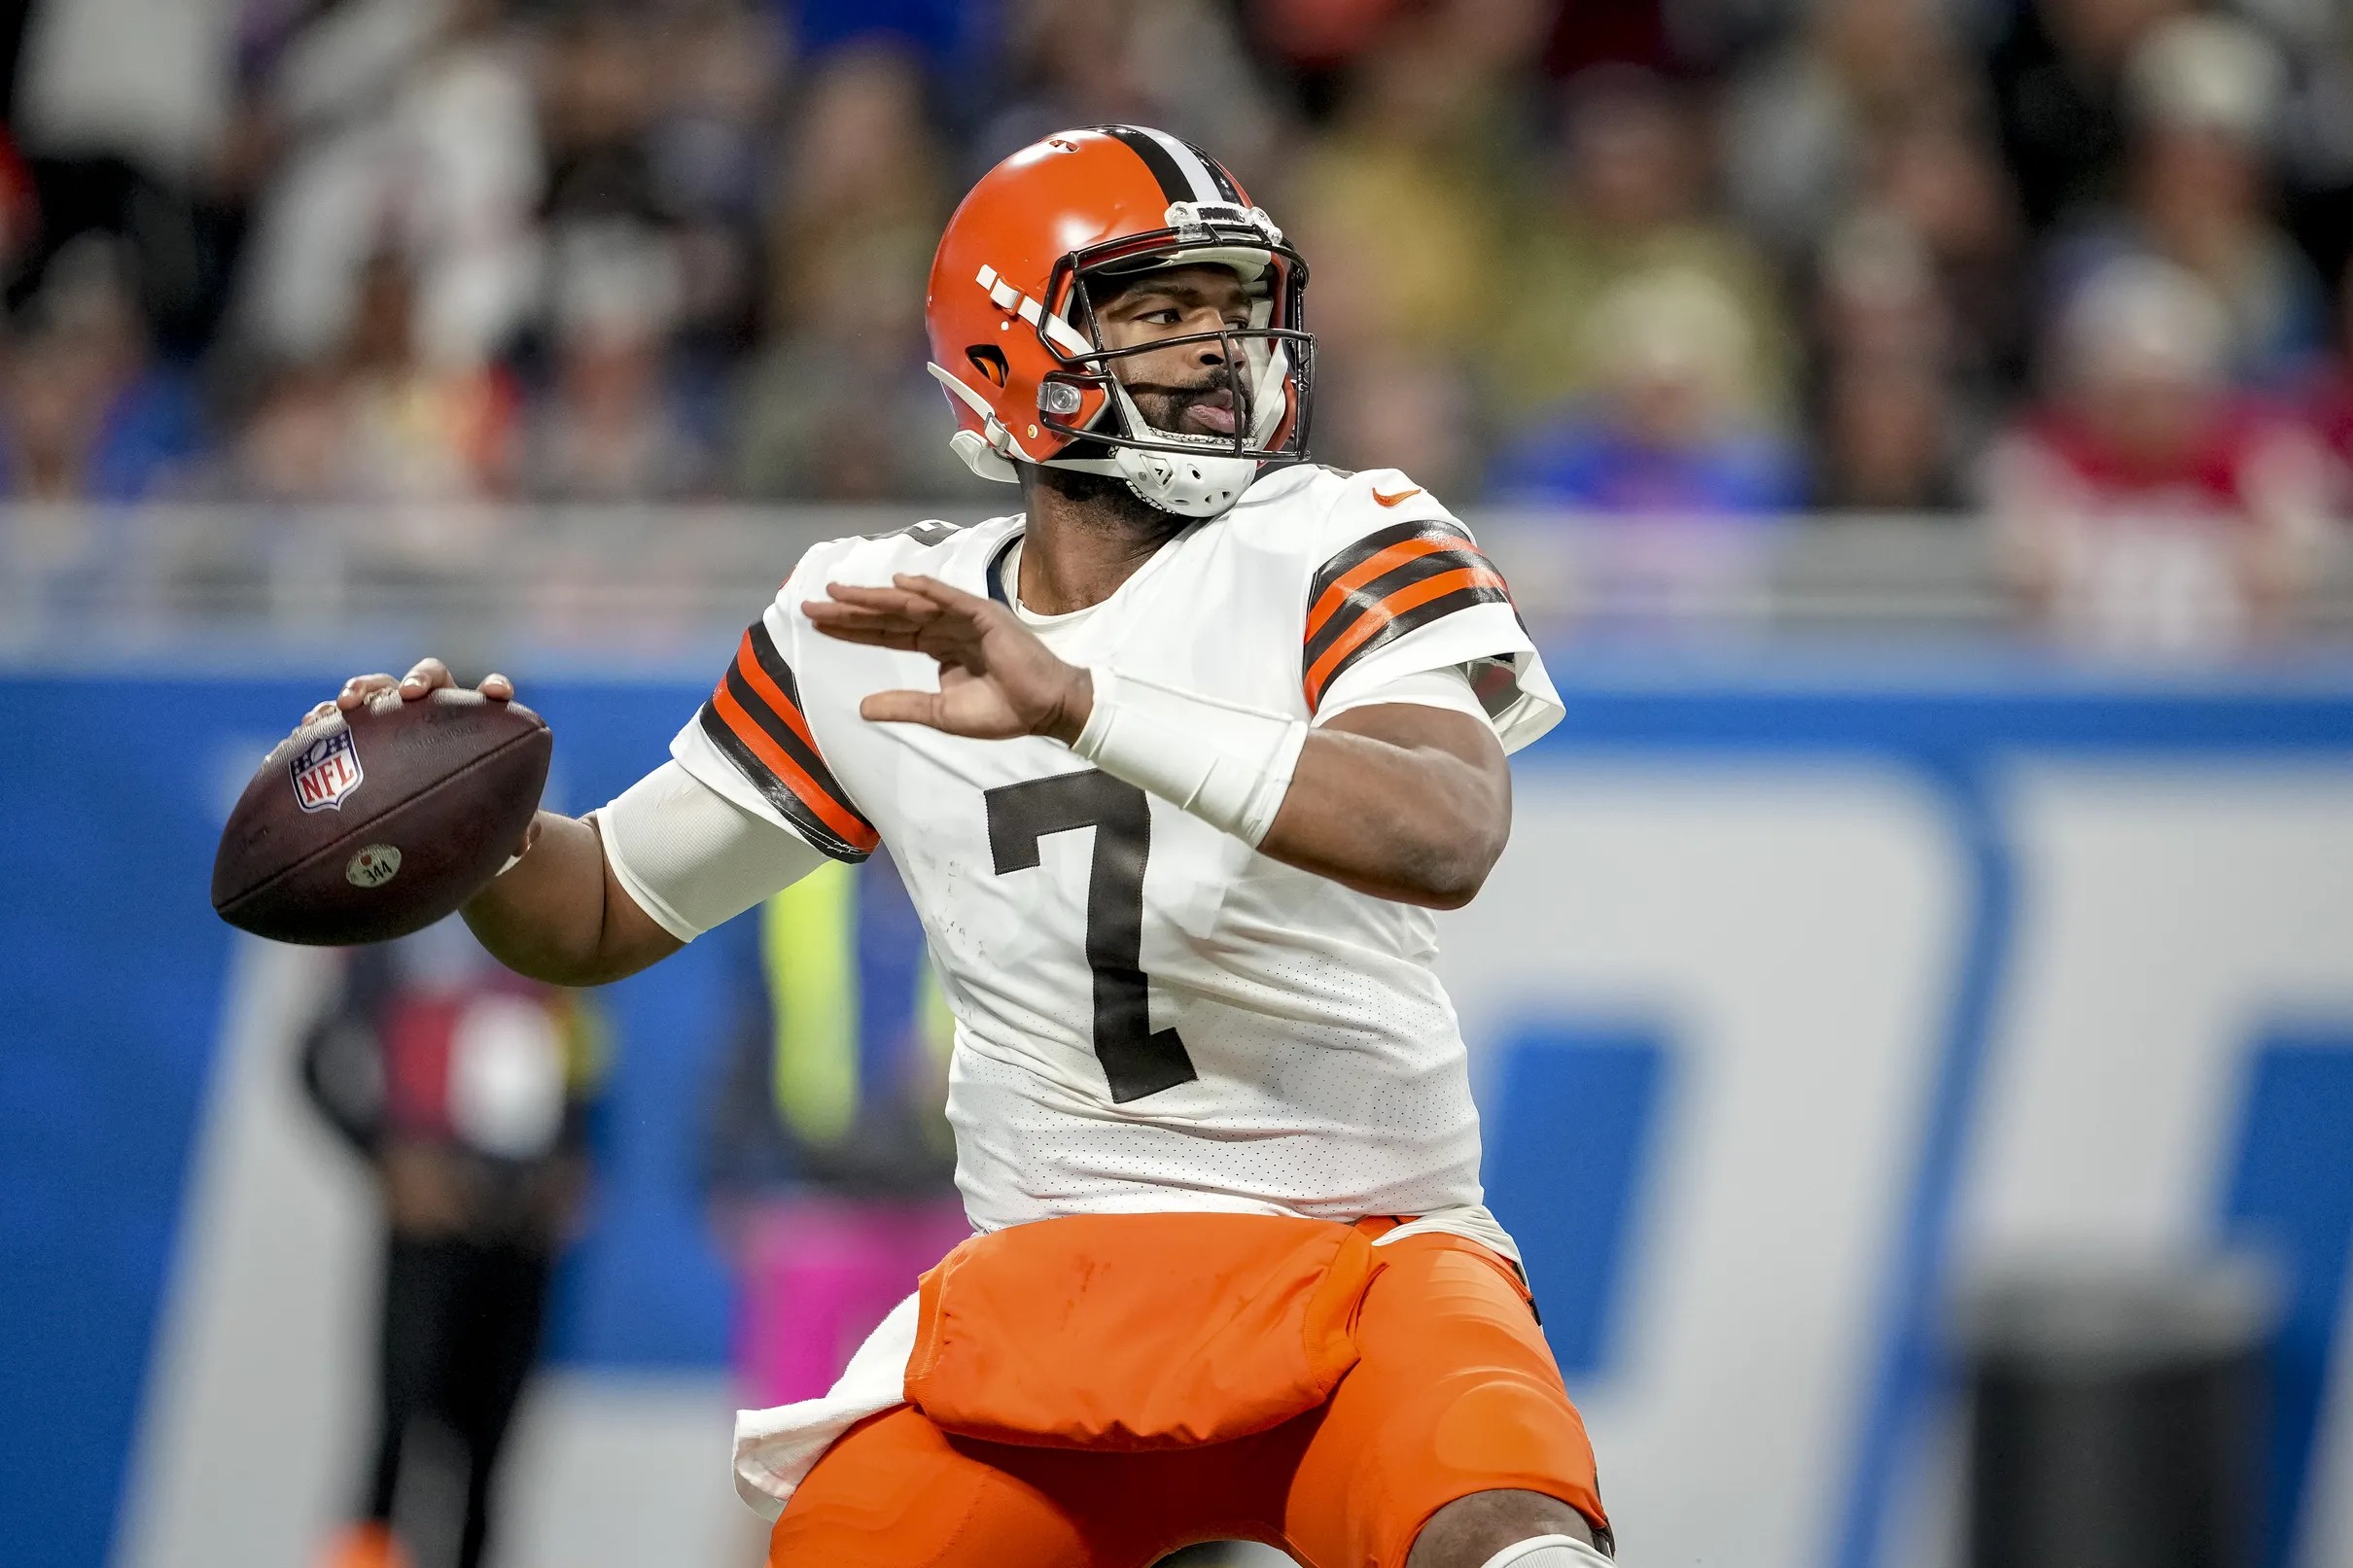 Free agent quarterback options with connections to Cardinals